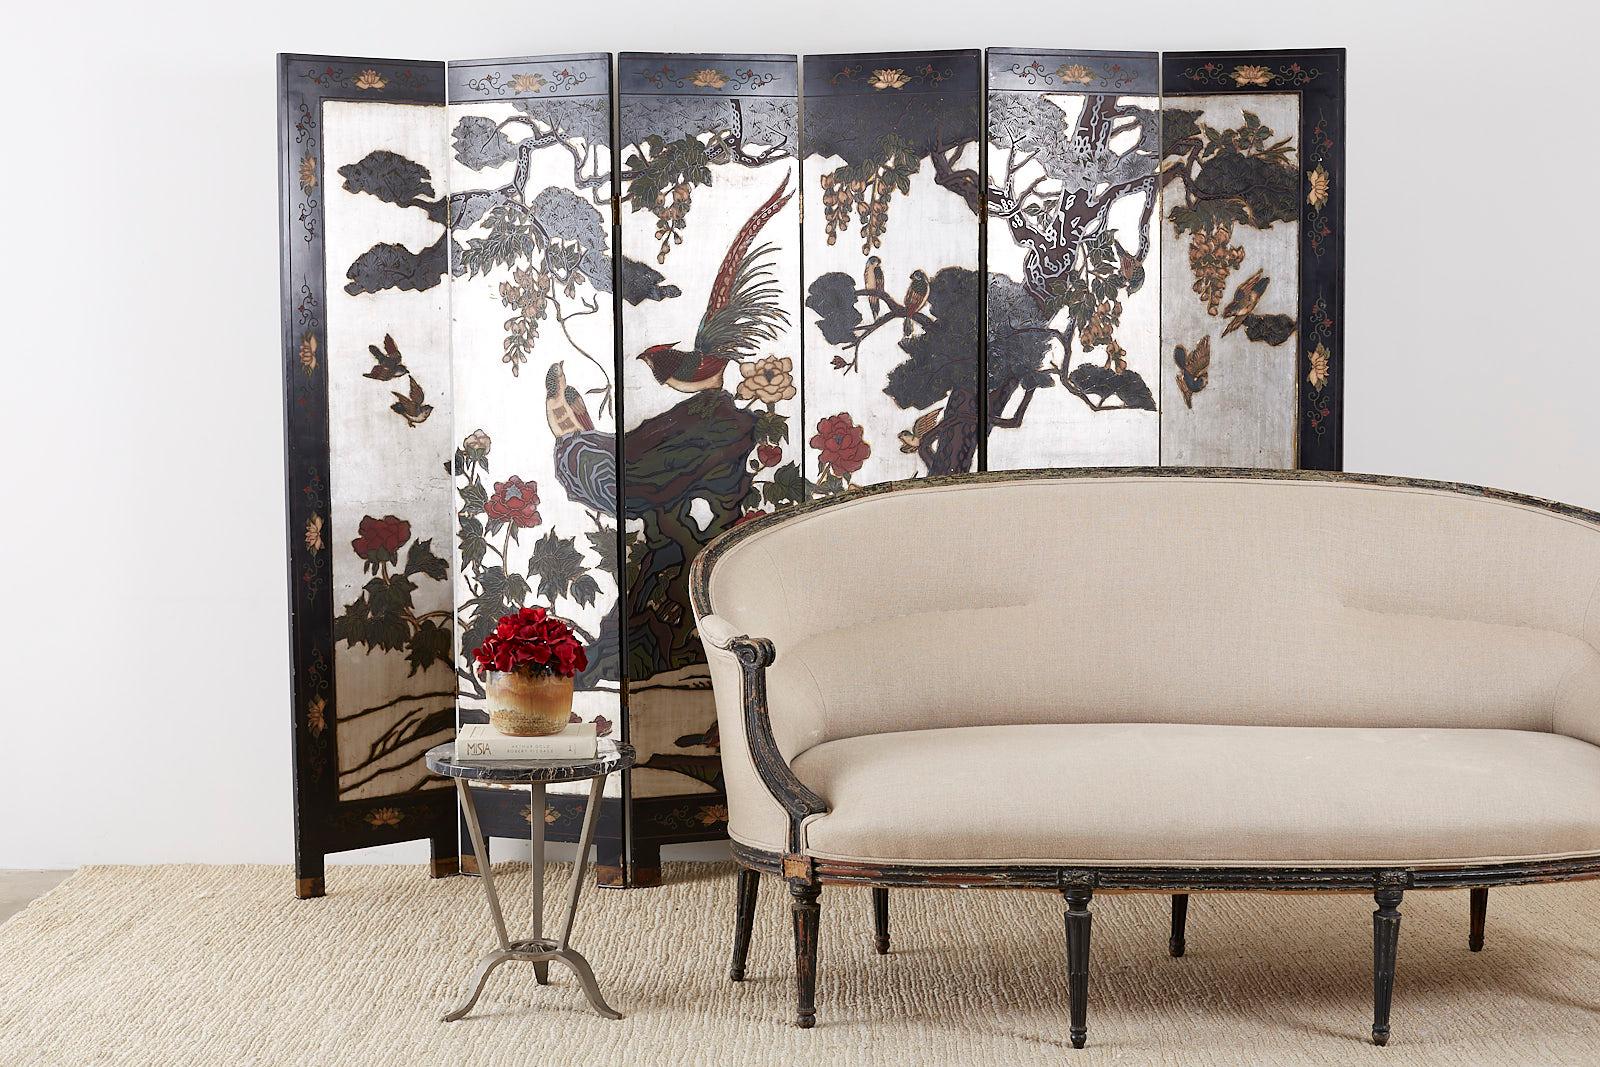 Impressive Chinese export six-panel folding coromandel screen depicting flora and fauna. Constructed from lacquered wooden panels hand carved and painted. Features a rare silver leaf background that make the scene Stand out with vibrant colors and